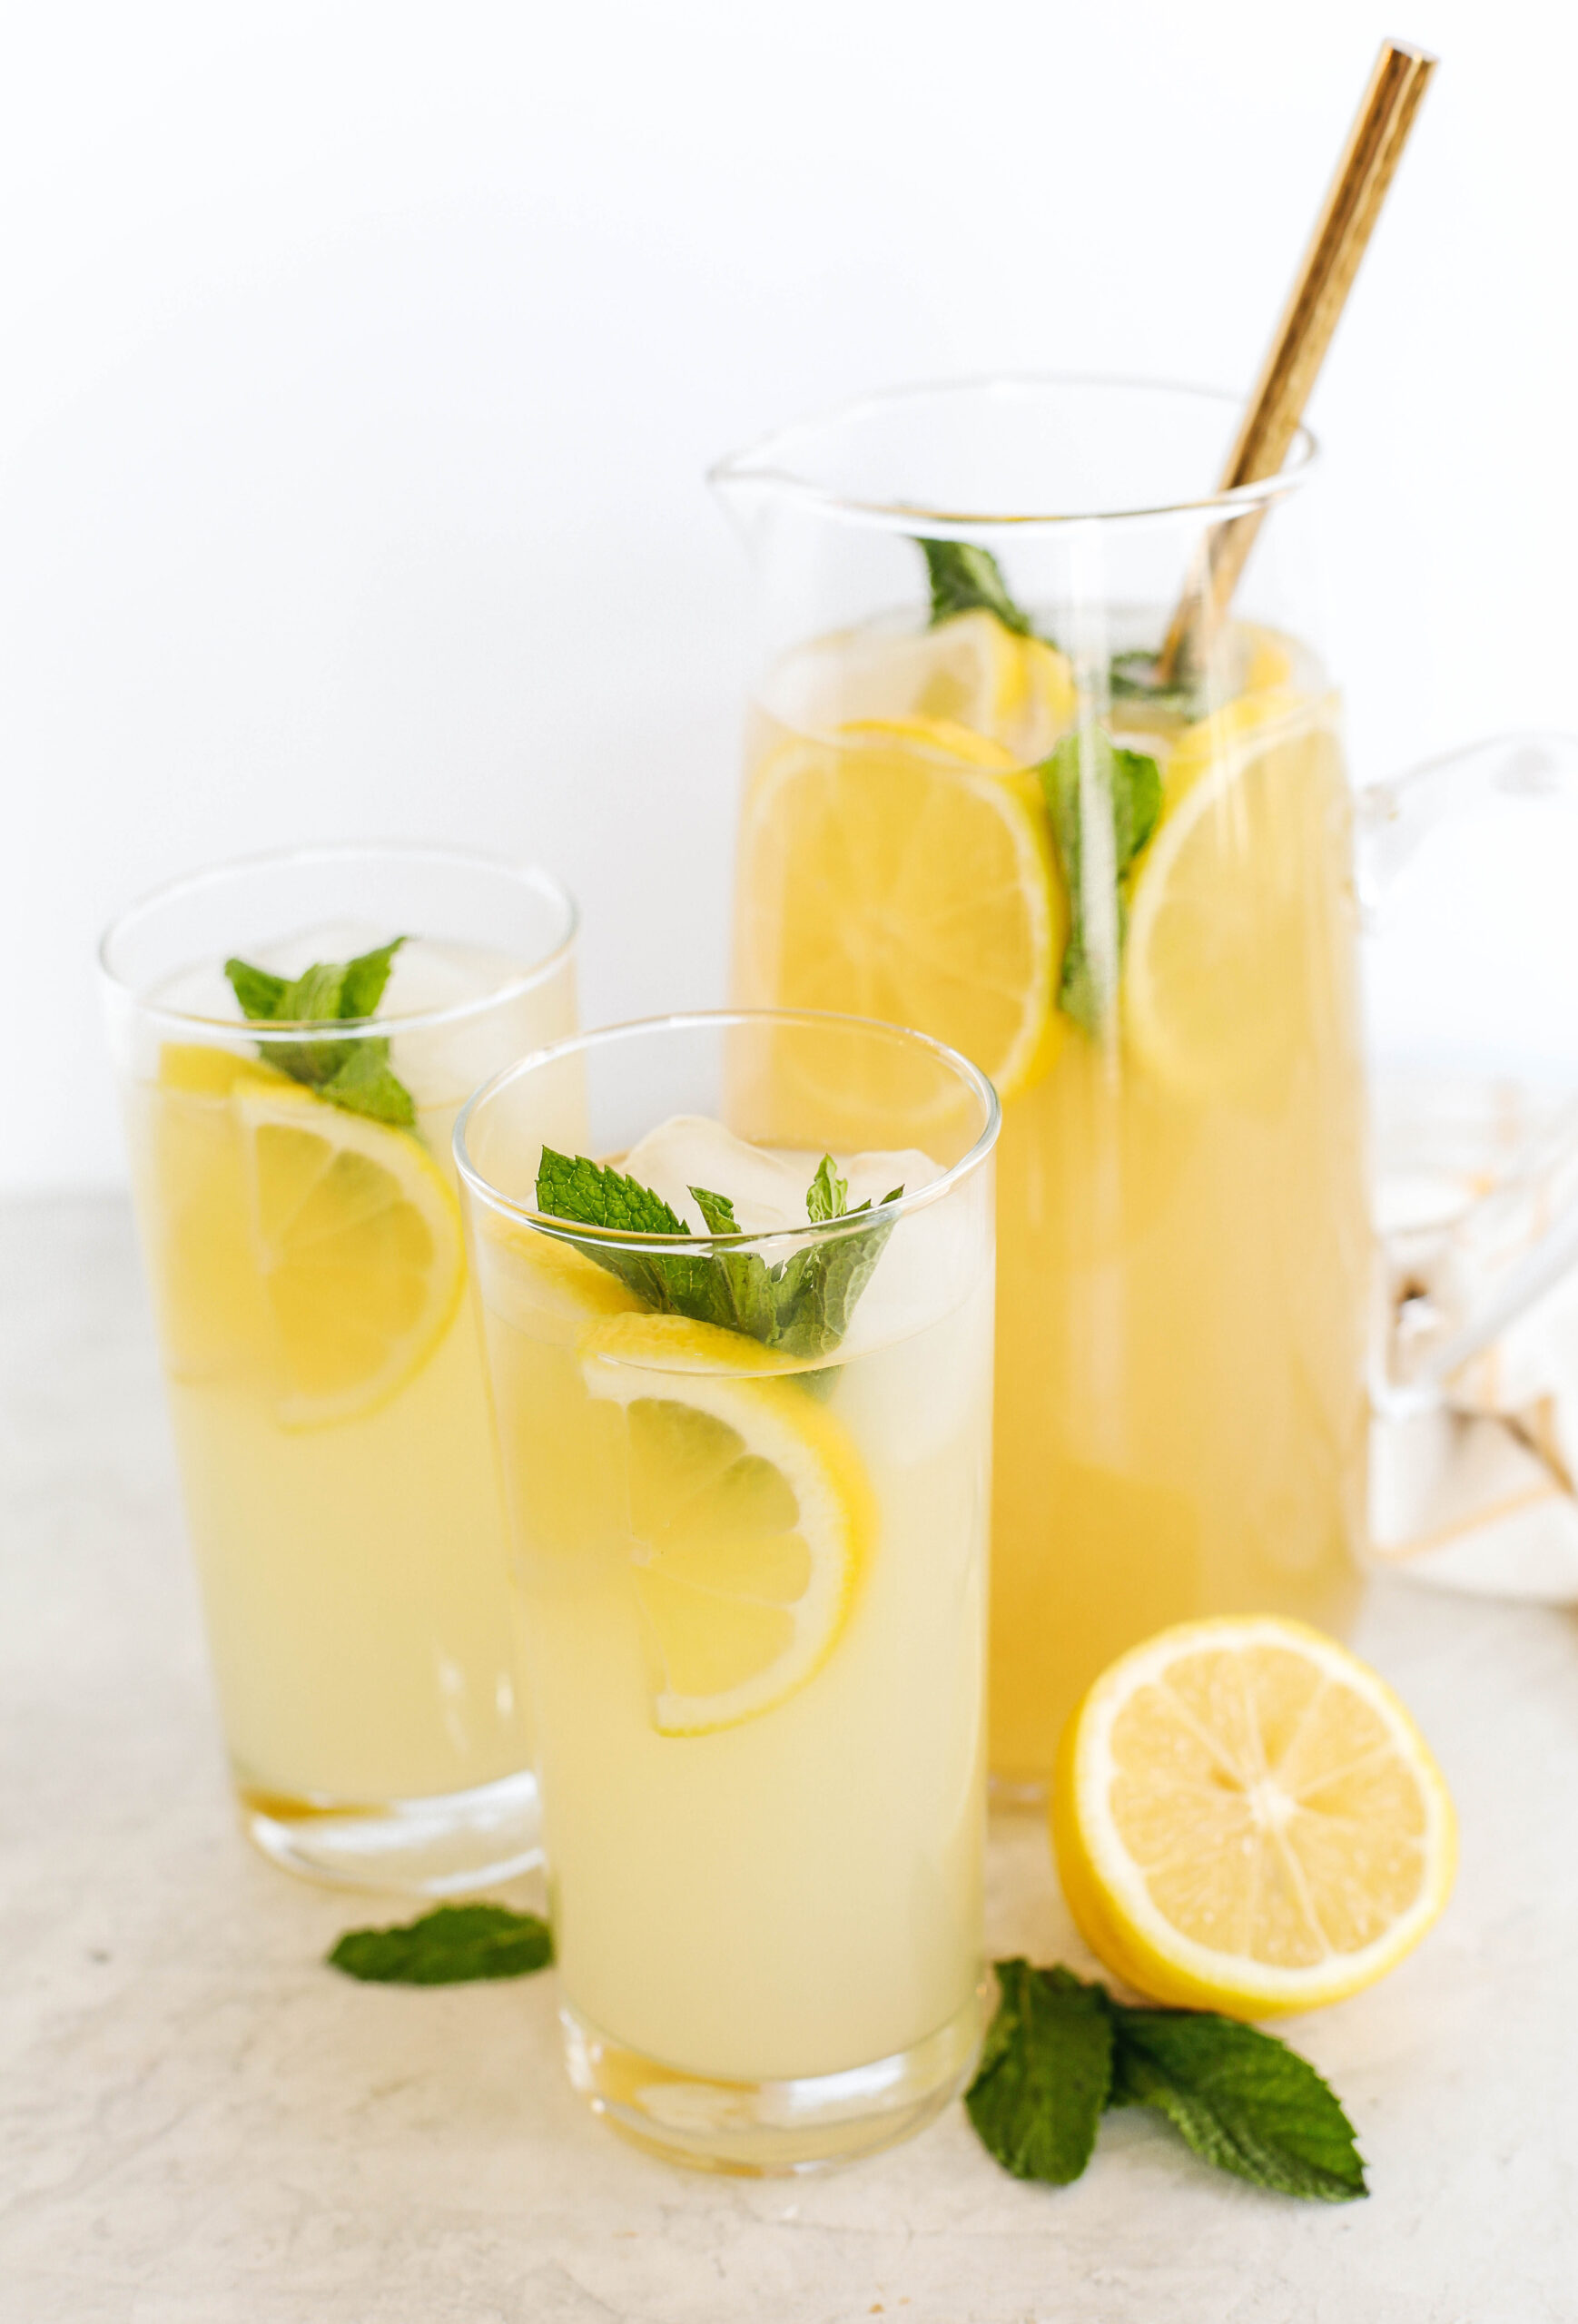 This Honey Ginger Lemonade makes the perfect summer beverage that is refreshing, delicious and easily made with just 4 simple ingredients!